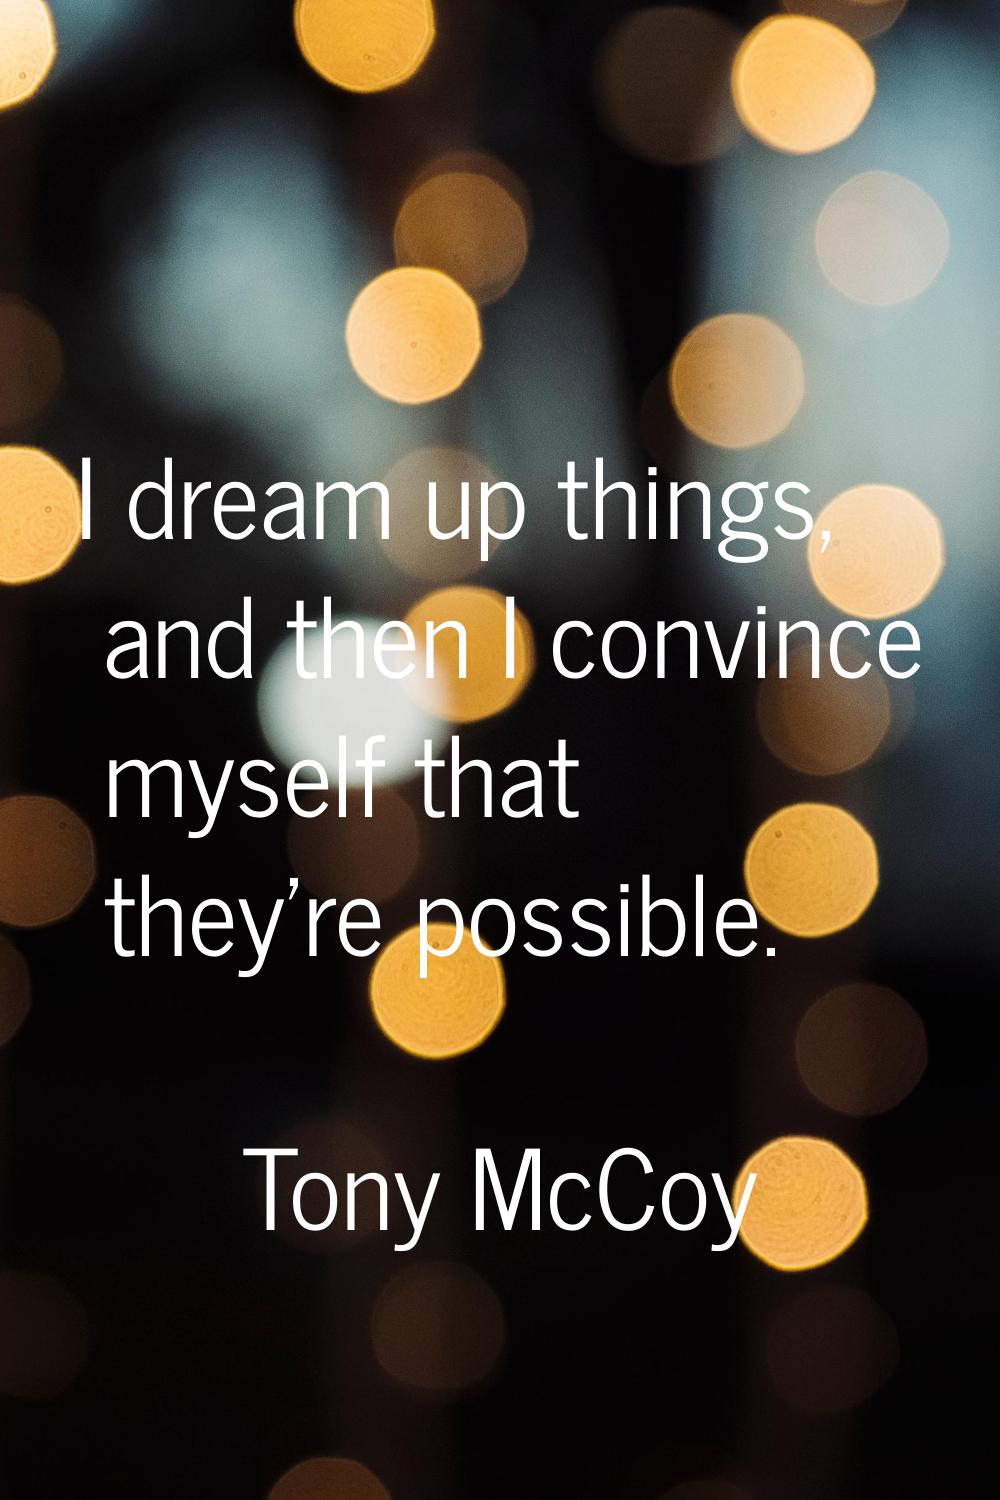 I dream up things, and then I convince myself that they're possible.